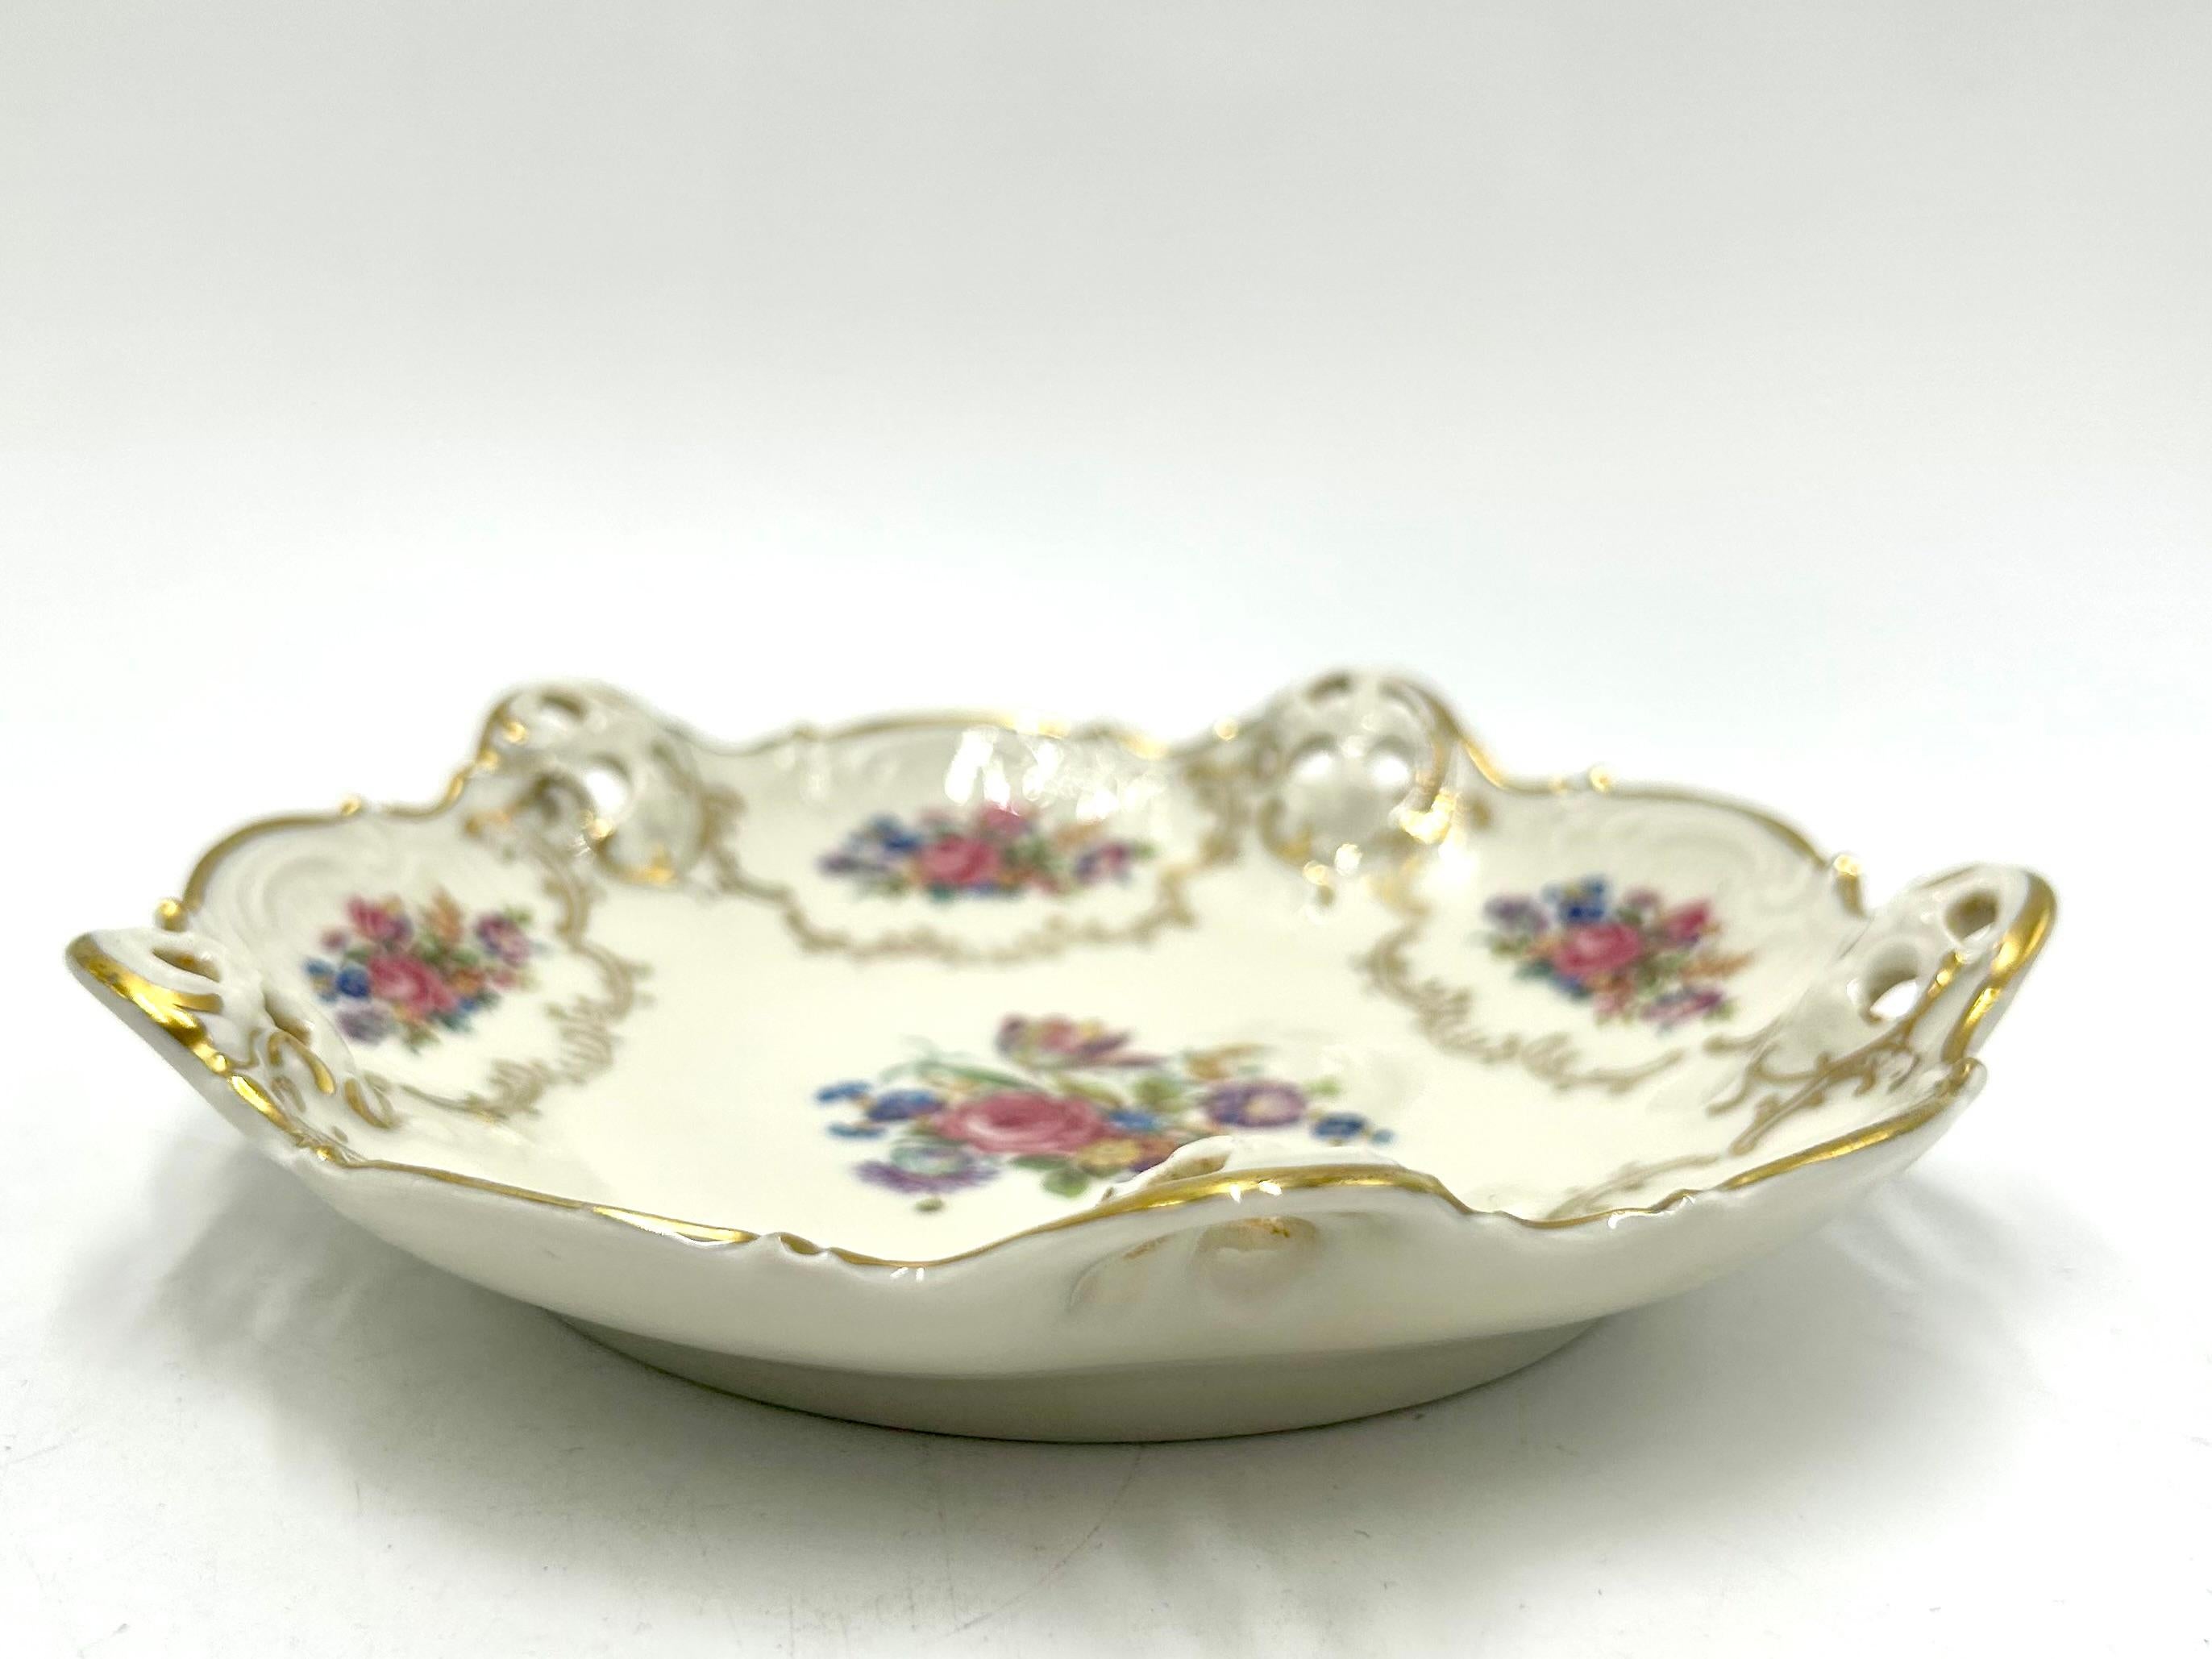 Porcelain openwork platter made of ecru porcelain, decorated with gilding and a bouquet of flowers motif. A product of the valued German manufacturer Rosenthal from the Moliere series. Signed with the mark used in the years 1938-1952. Very good